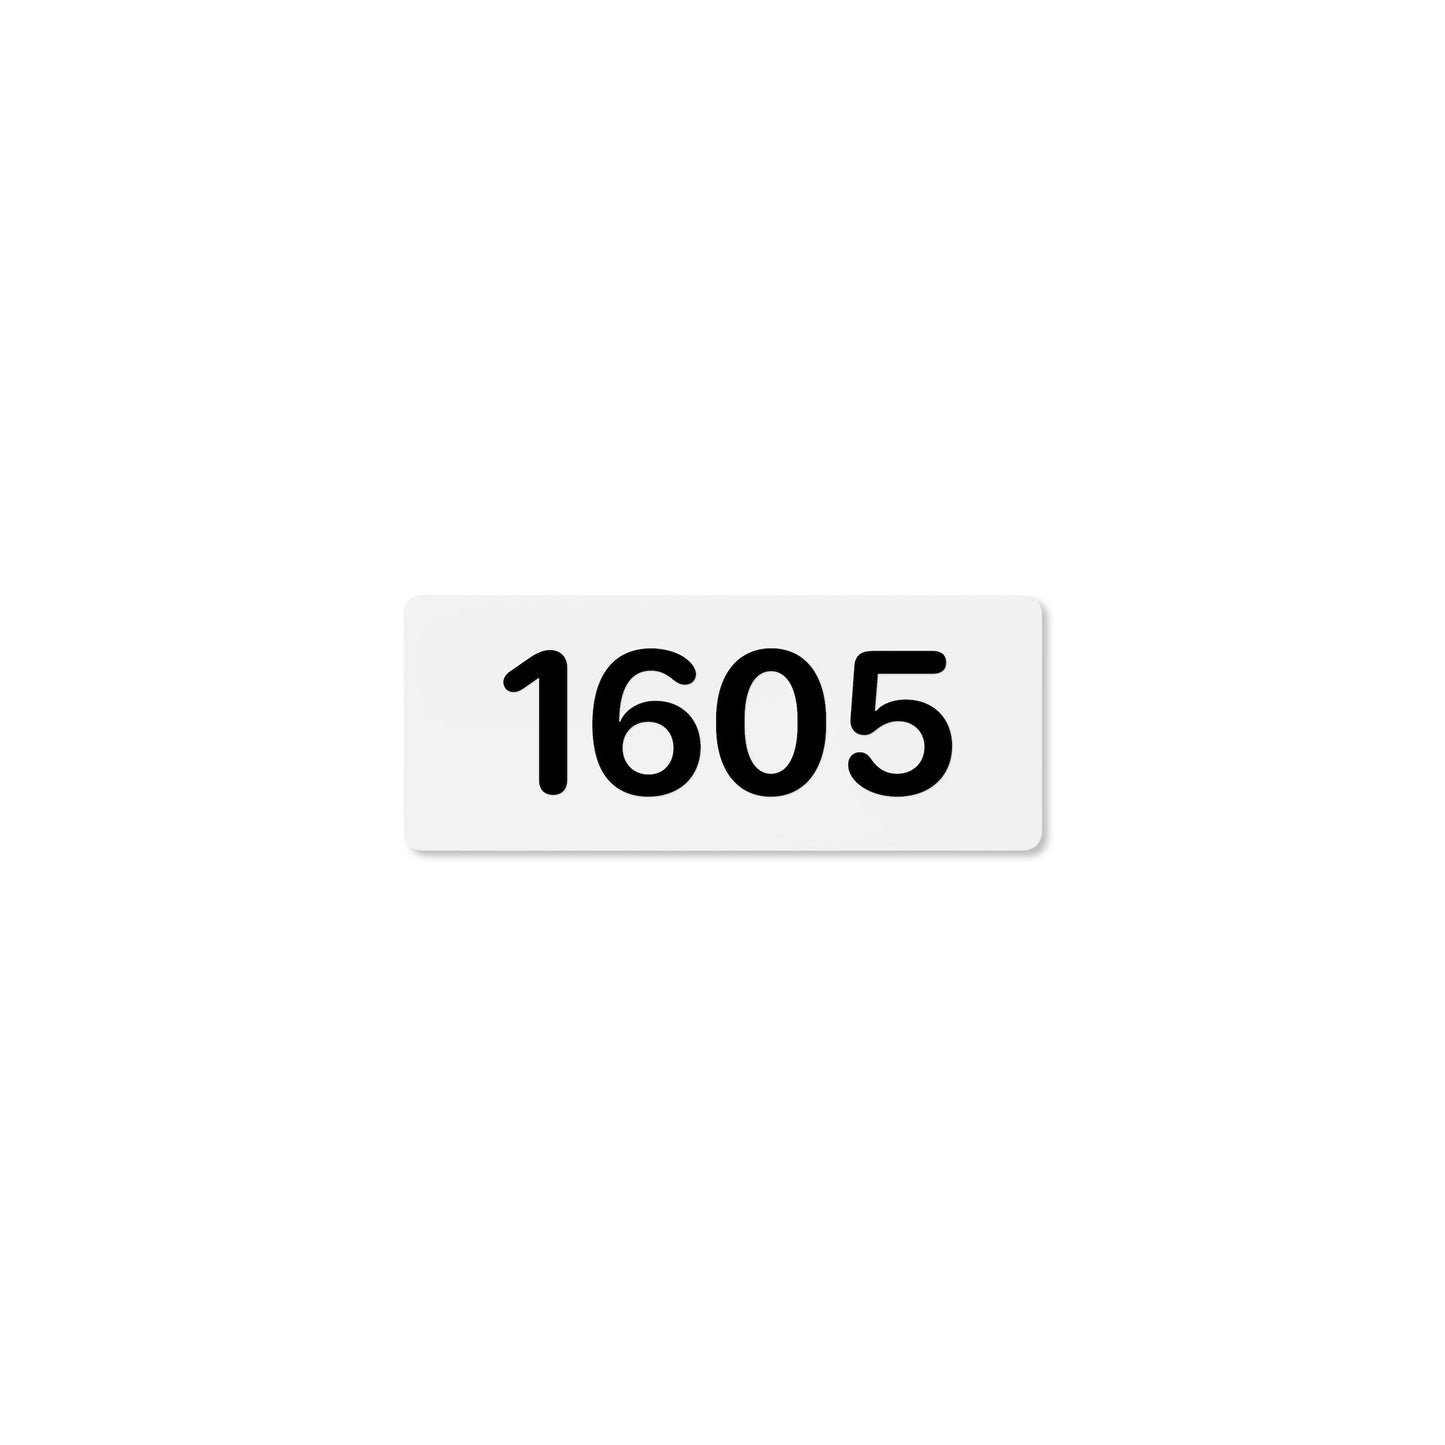 Numeral 1605